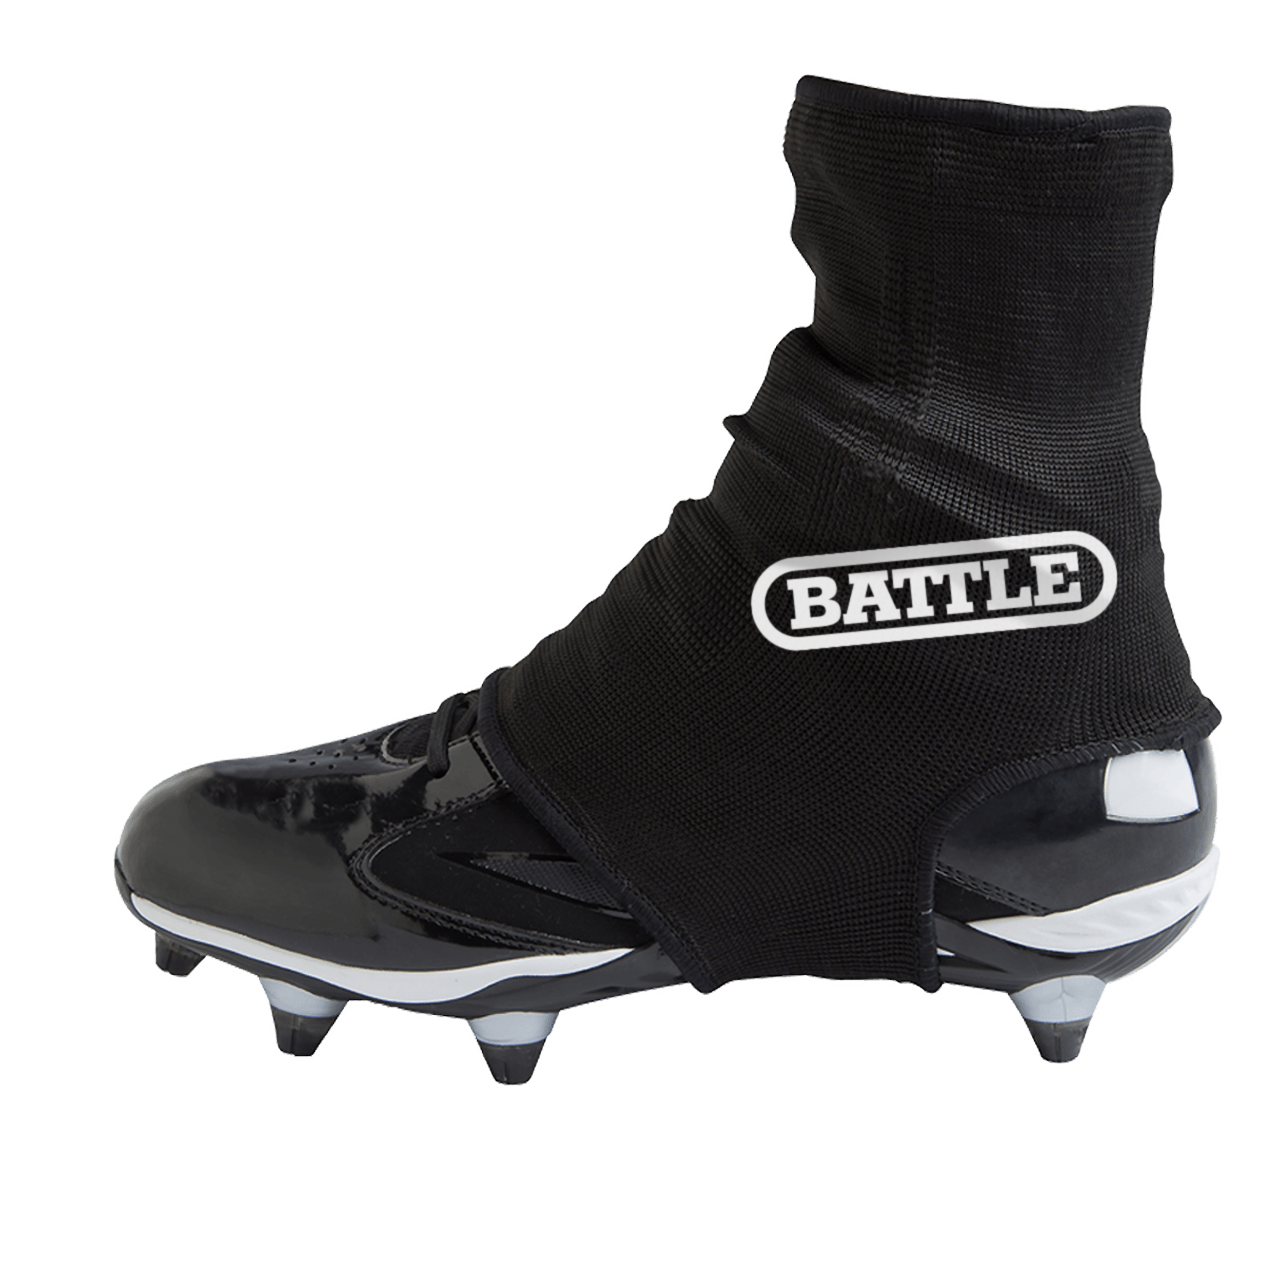 Battle Cleat Sleeve Black with White BATTLE Logo Adult New